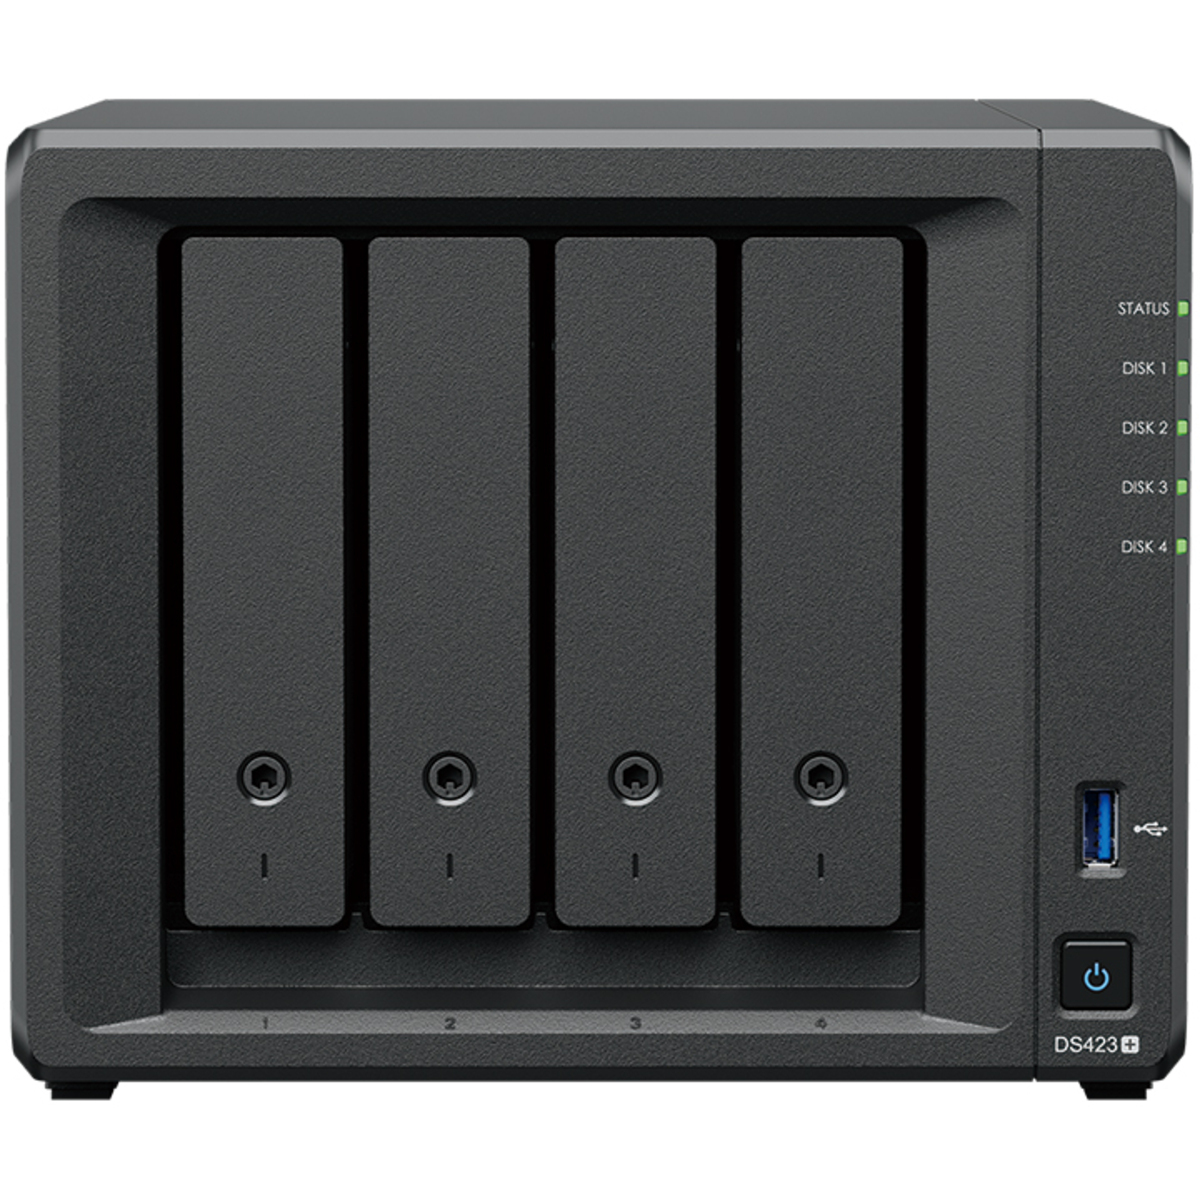 Synology DiskStation DS423+ 40tb 4-Bay Desktop Multimedia / Power User / Business NAS - Network Attached Storage Device 4x10tb Seagate EXOS X18 ST10000NM018G 3.5 7200rpm SATA 6Gb/s HDD ENTERPRISE Class Drives Installed - Burn-In Tested - FREE RAM UPGRADE DiskStation DS423+